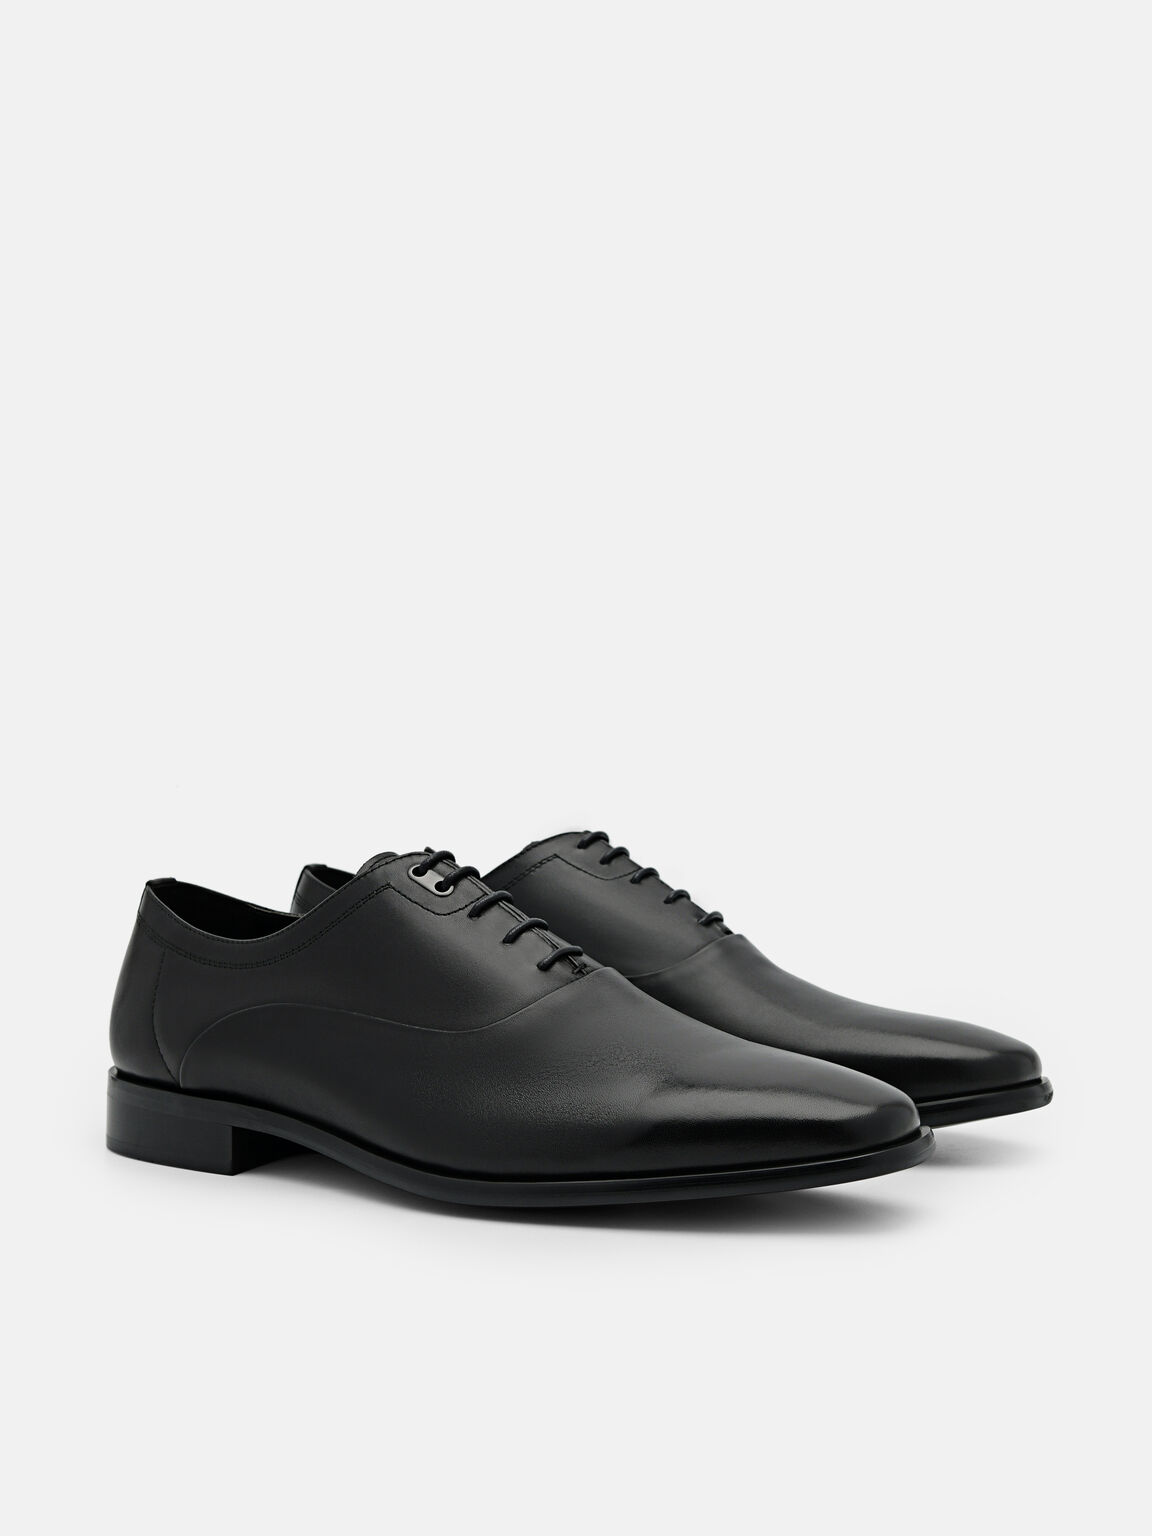 Leather Oxford Shoes, Black